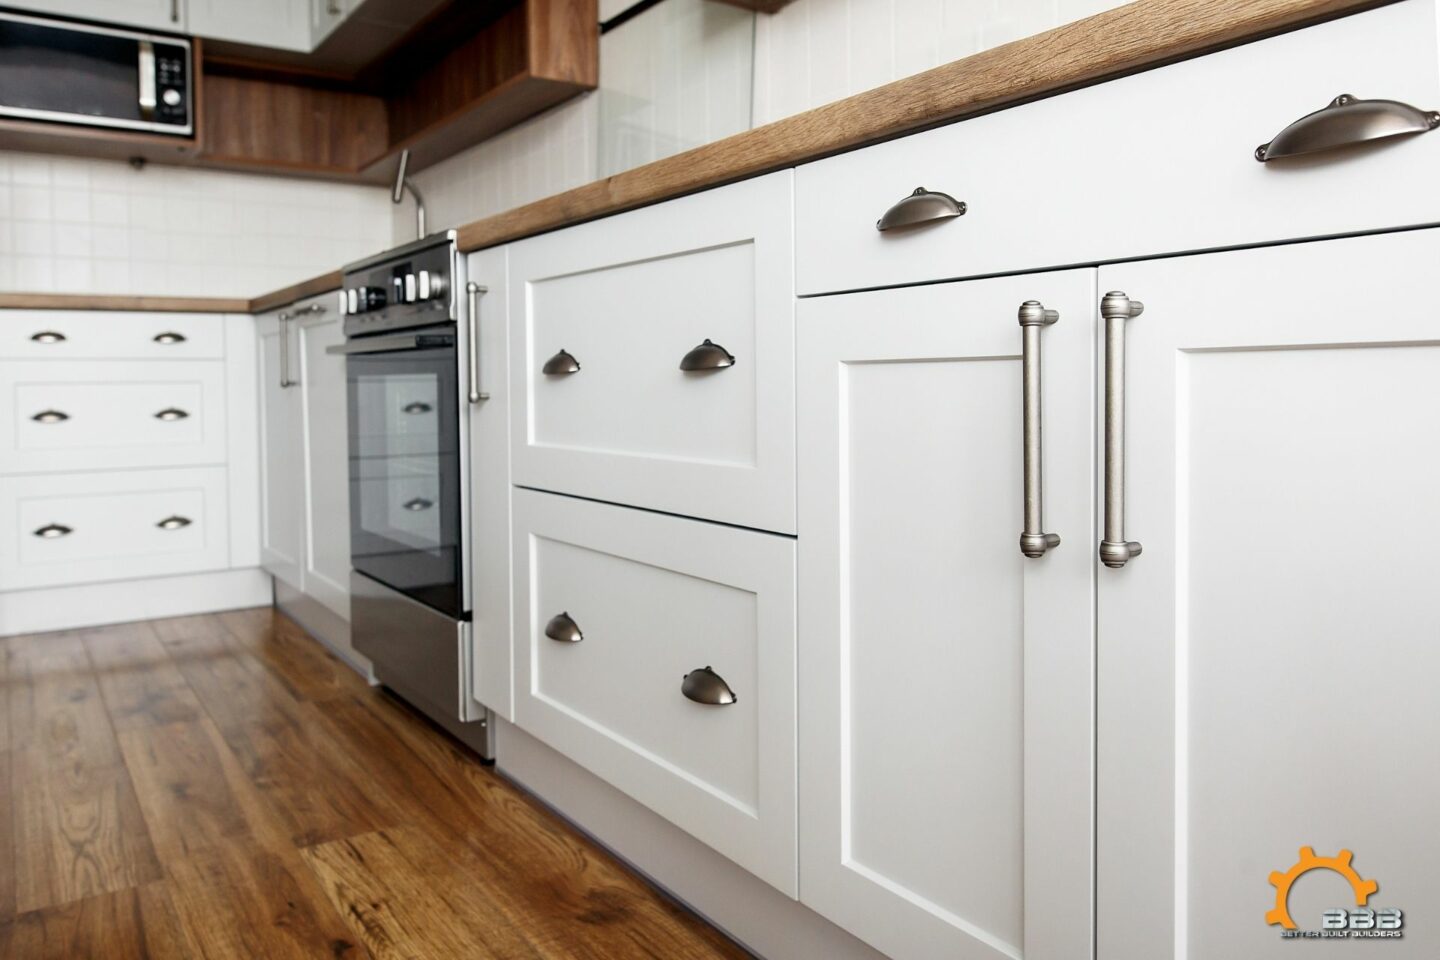 Kitchen Remodeling - Cabinets